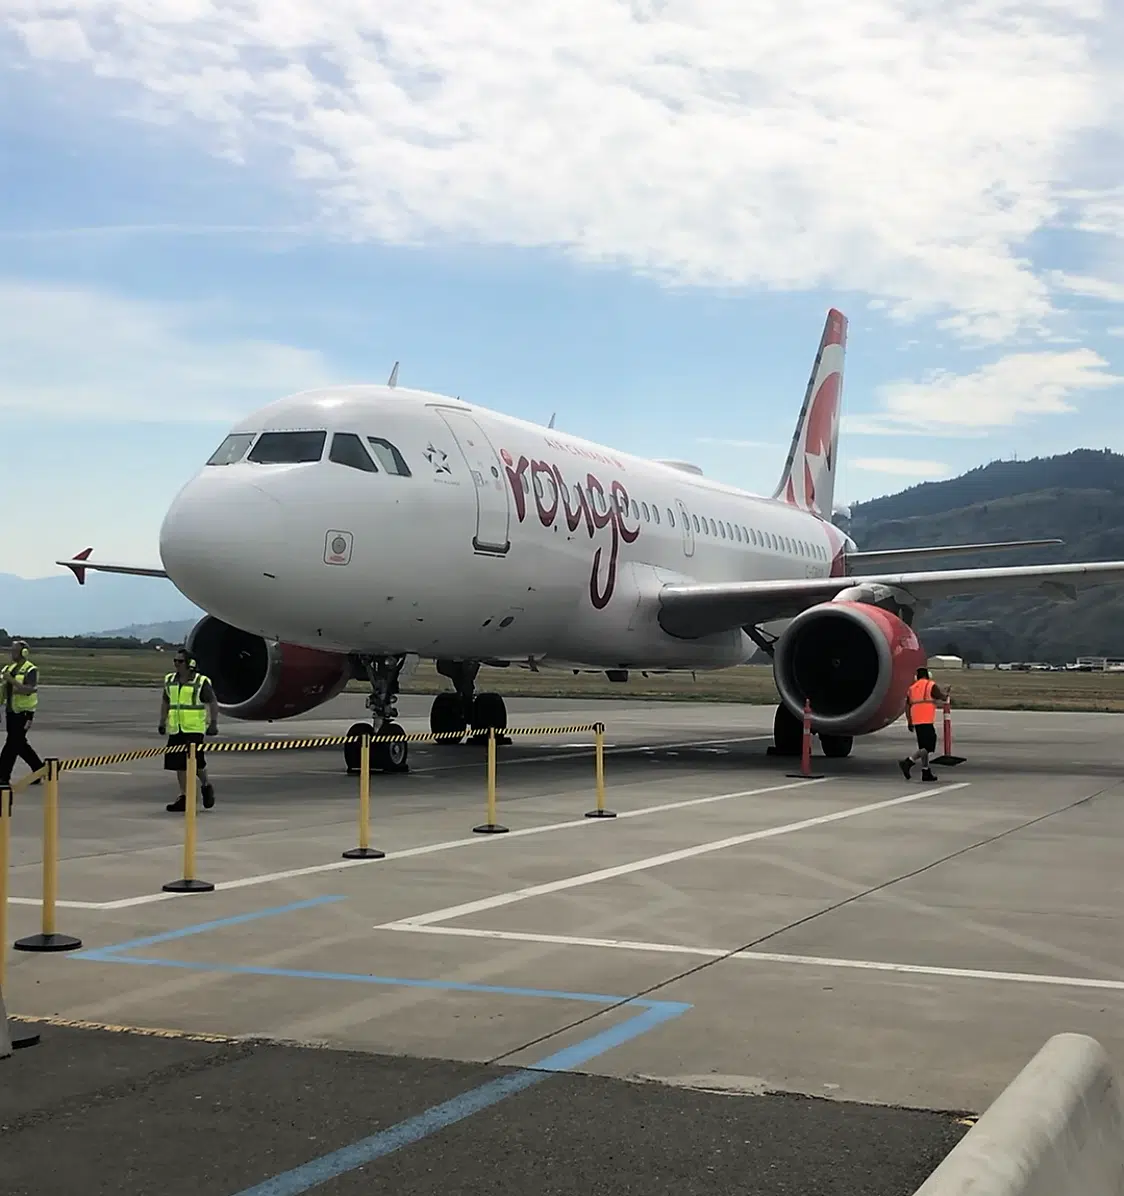 Over 2,000 passengers used Air Canada Toronto-to-Kamloops direct flight this summer